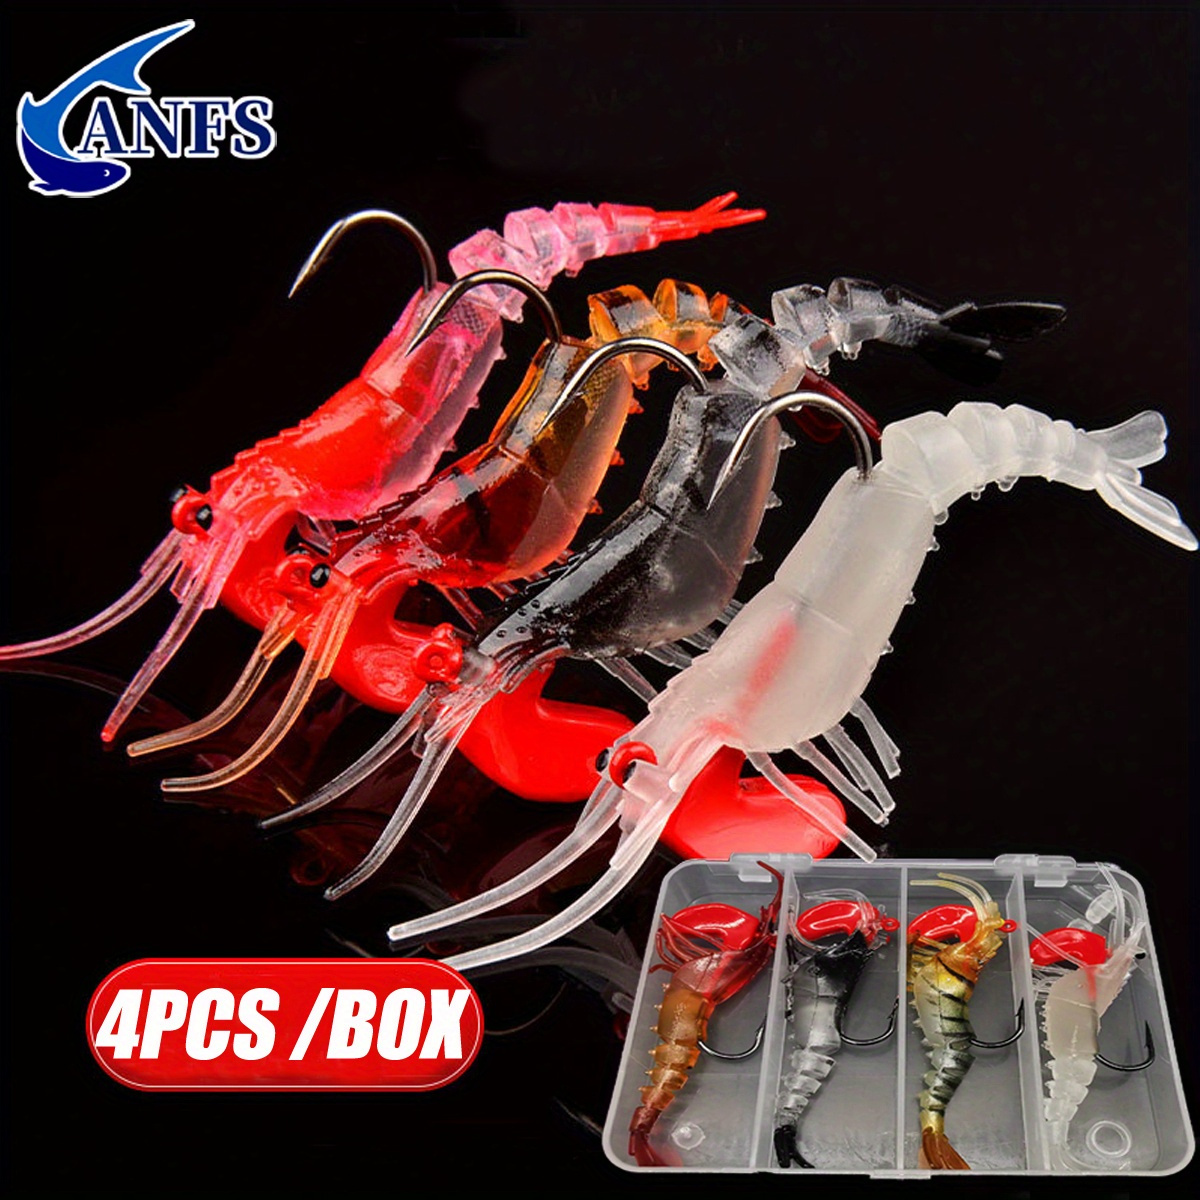 YuanYouTong Hard Plastic Fishing Lures, 4 Pcs Shrimp Lures Set with Sea  Fishing Hooks, Artificial Bait for Sea Bass, Pike, Trout, Perch and  Mackerel